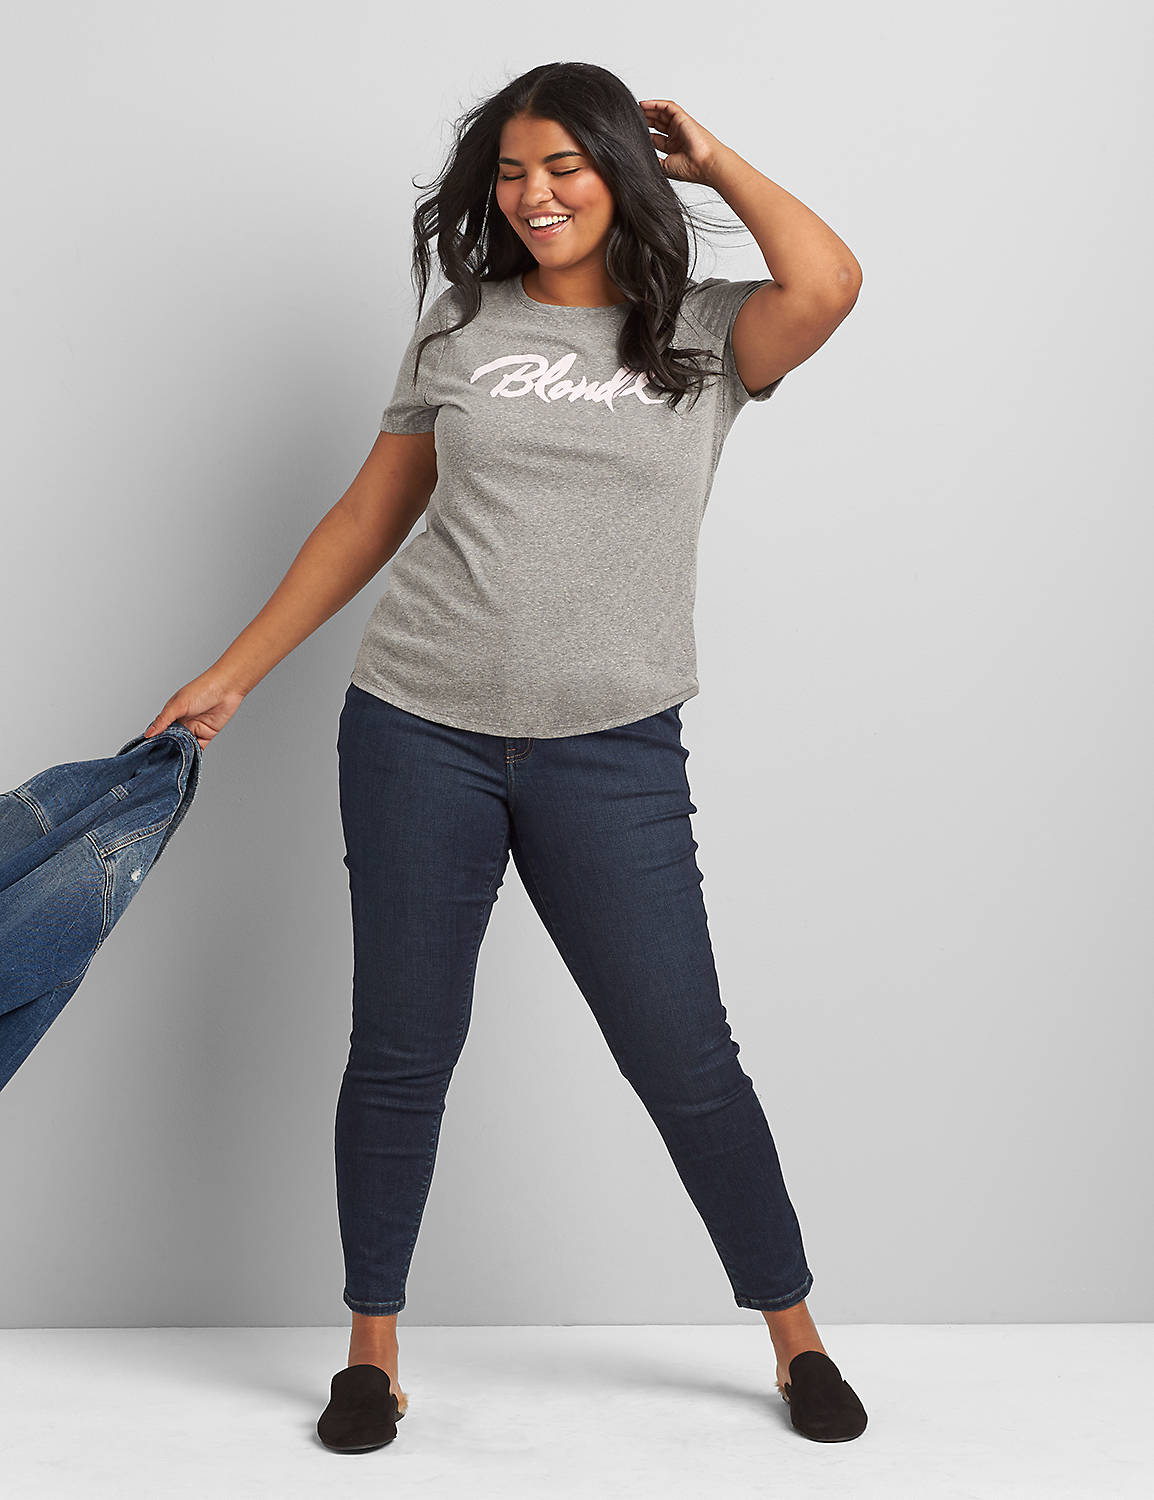 Short Sleeve Crew Neck Tee Graphic: Blondie 1118221:Charcoal Grey Heather:26/28 Product Image 3